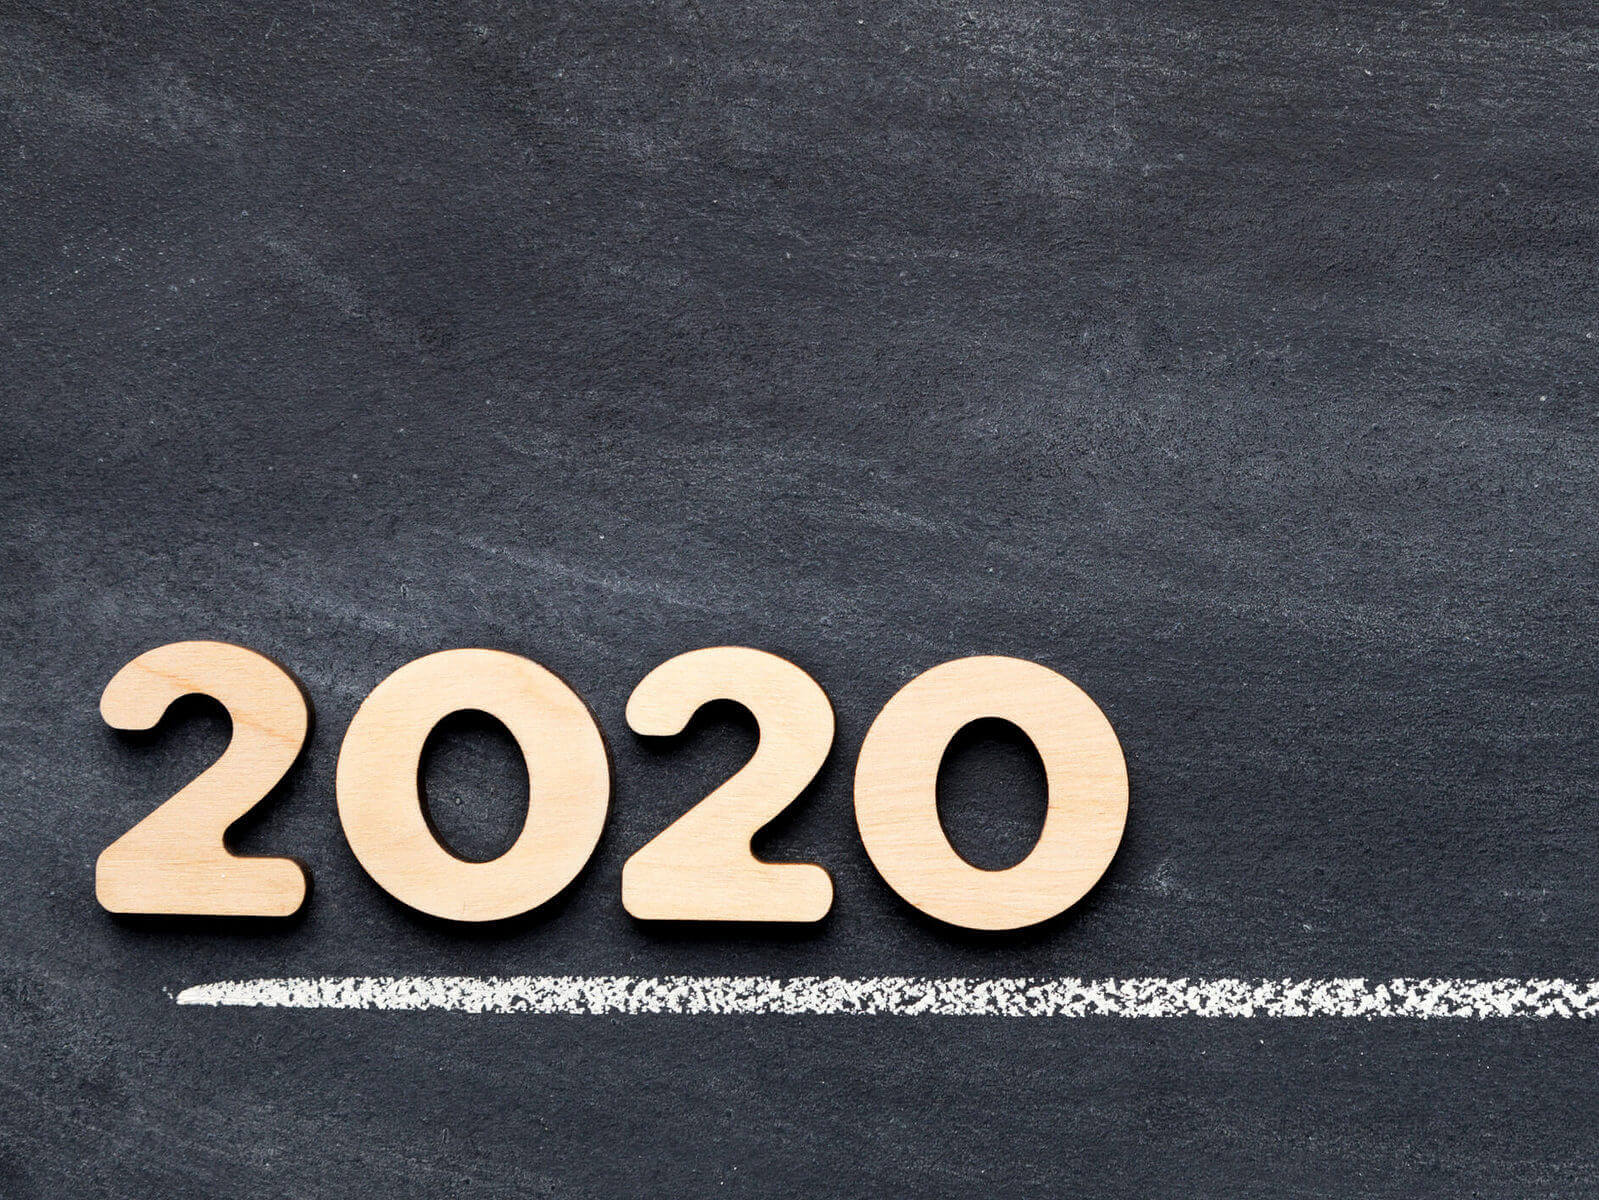 Text that says 2020